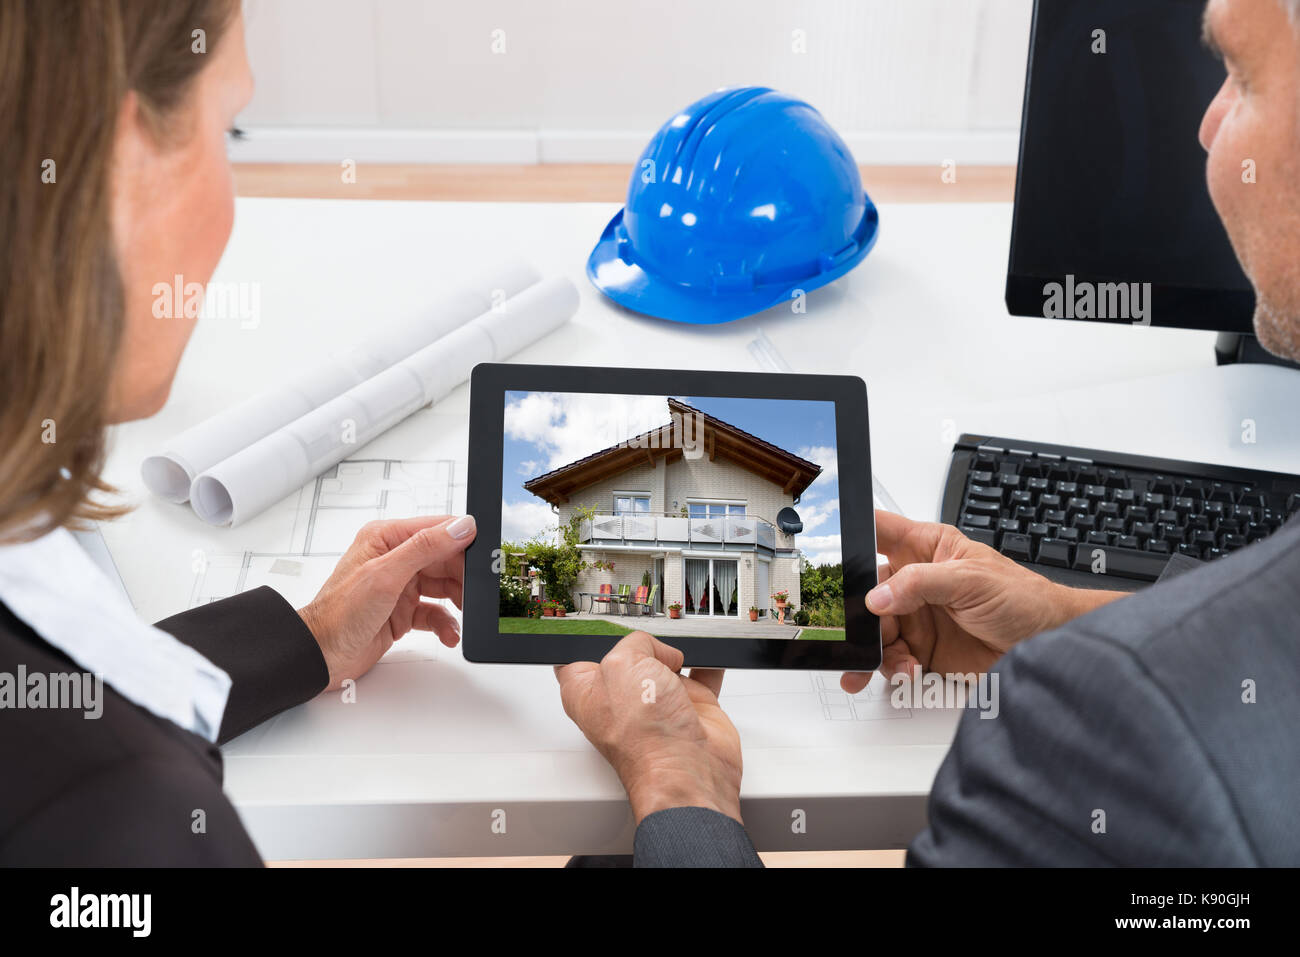 Close-up Of Two Architects Looking At House On Digital Tablet At Desk Stock Photo